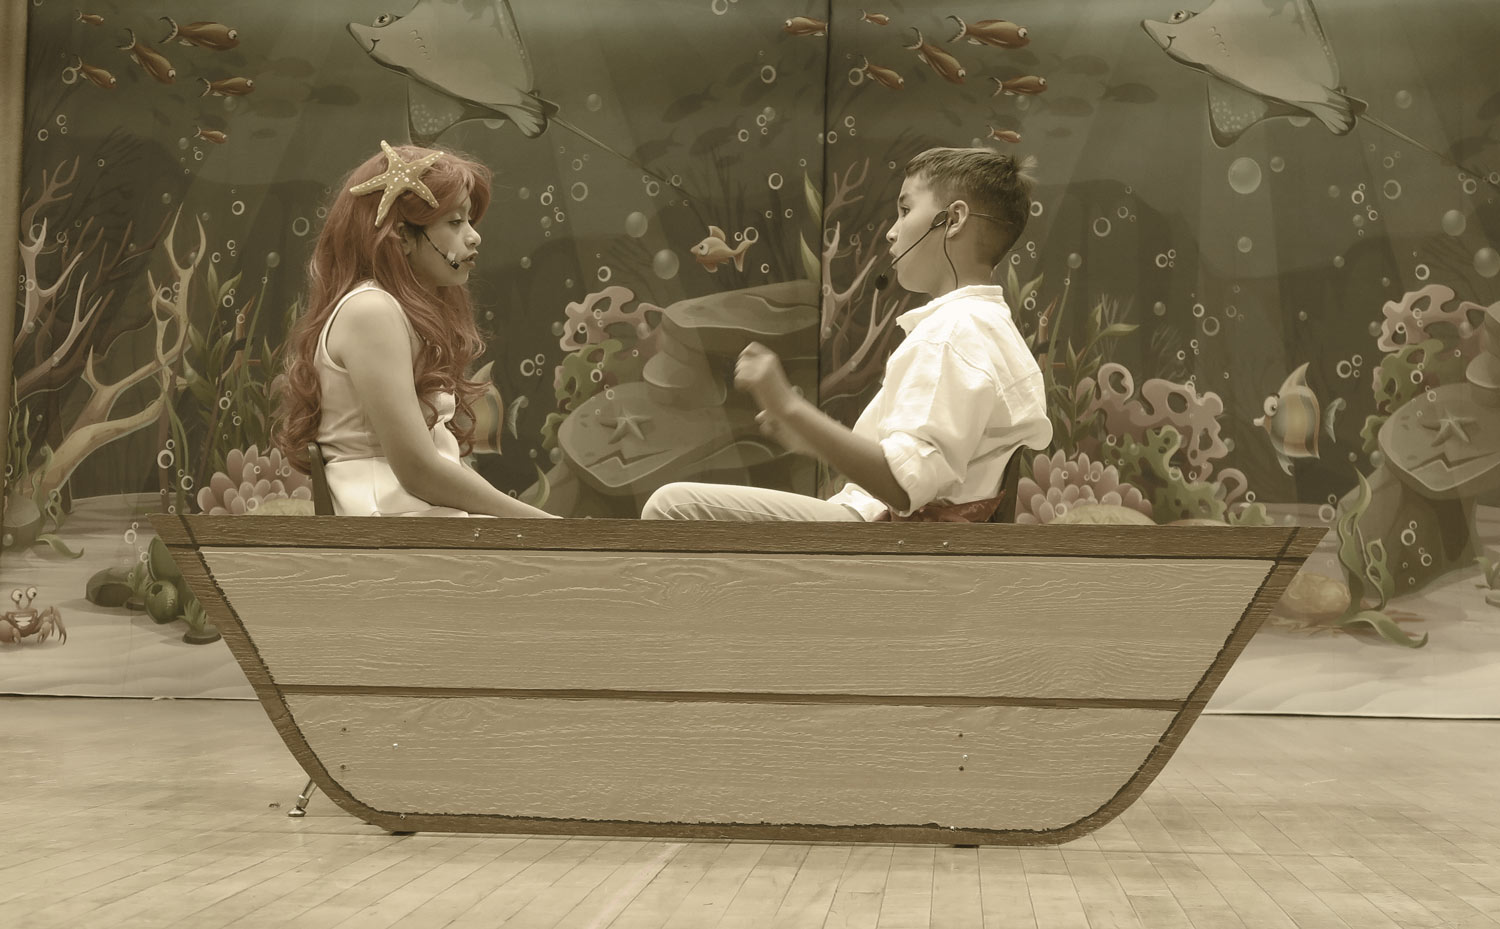 Students Acting Out A Scene in "The Little Mermaid" On stage